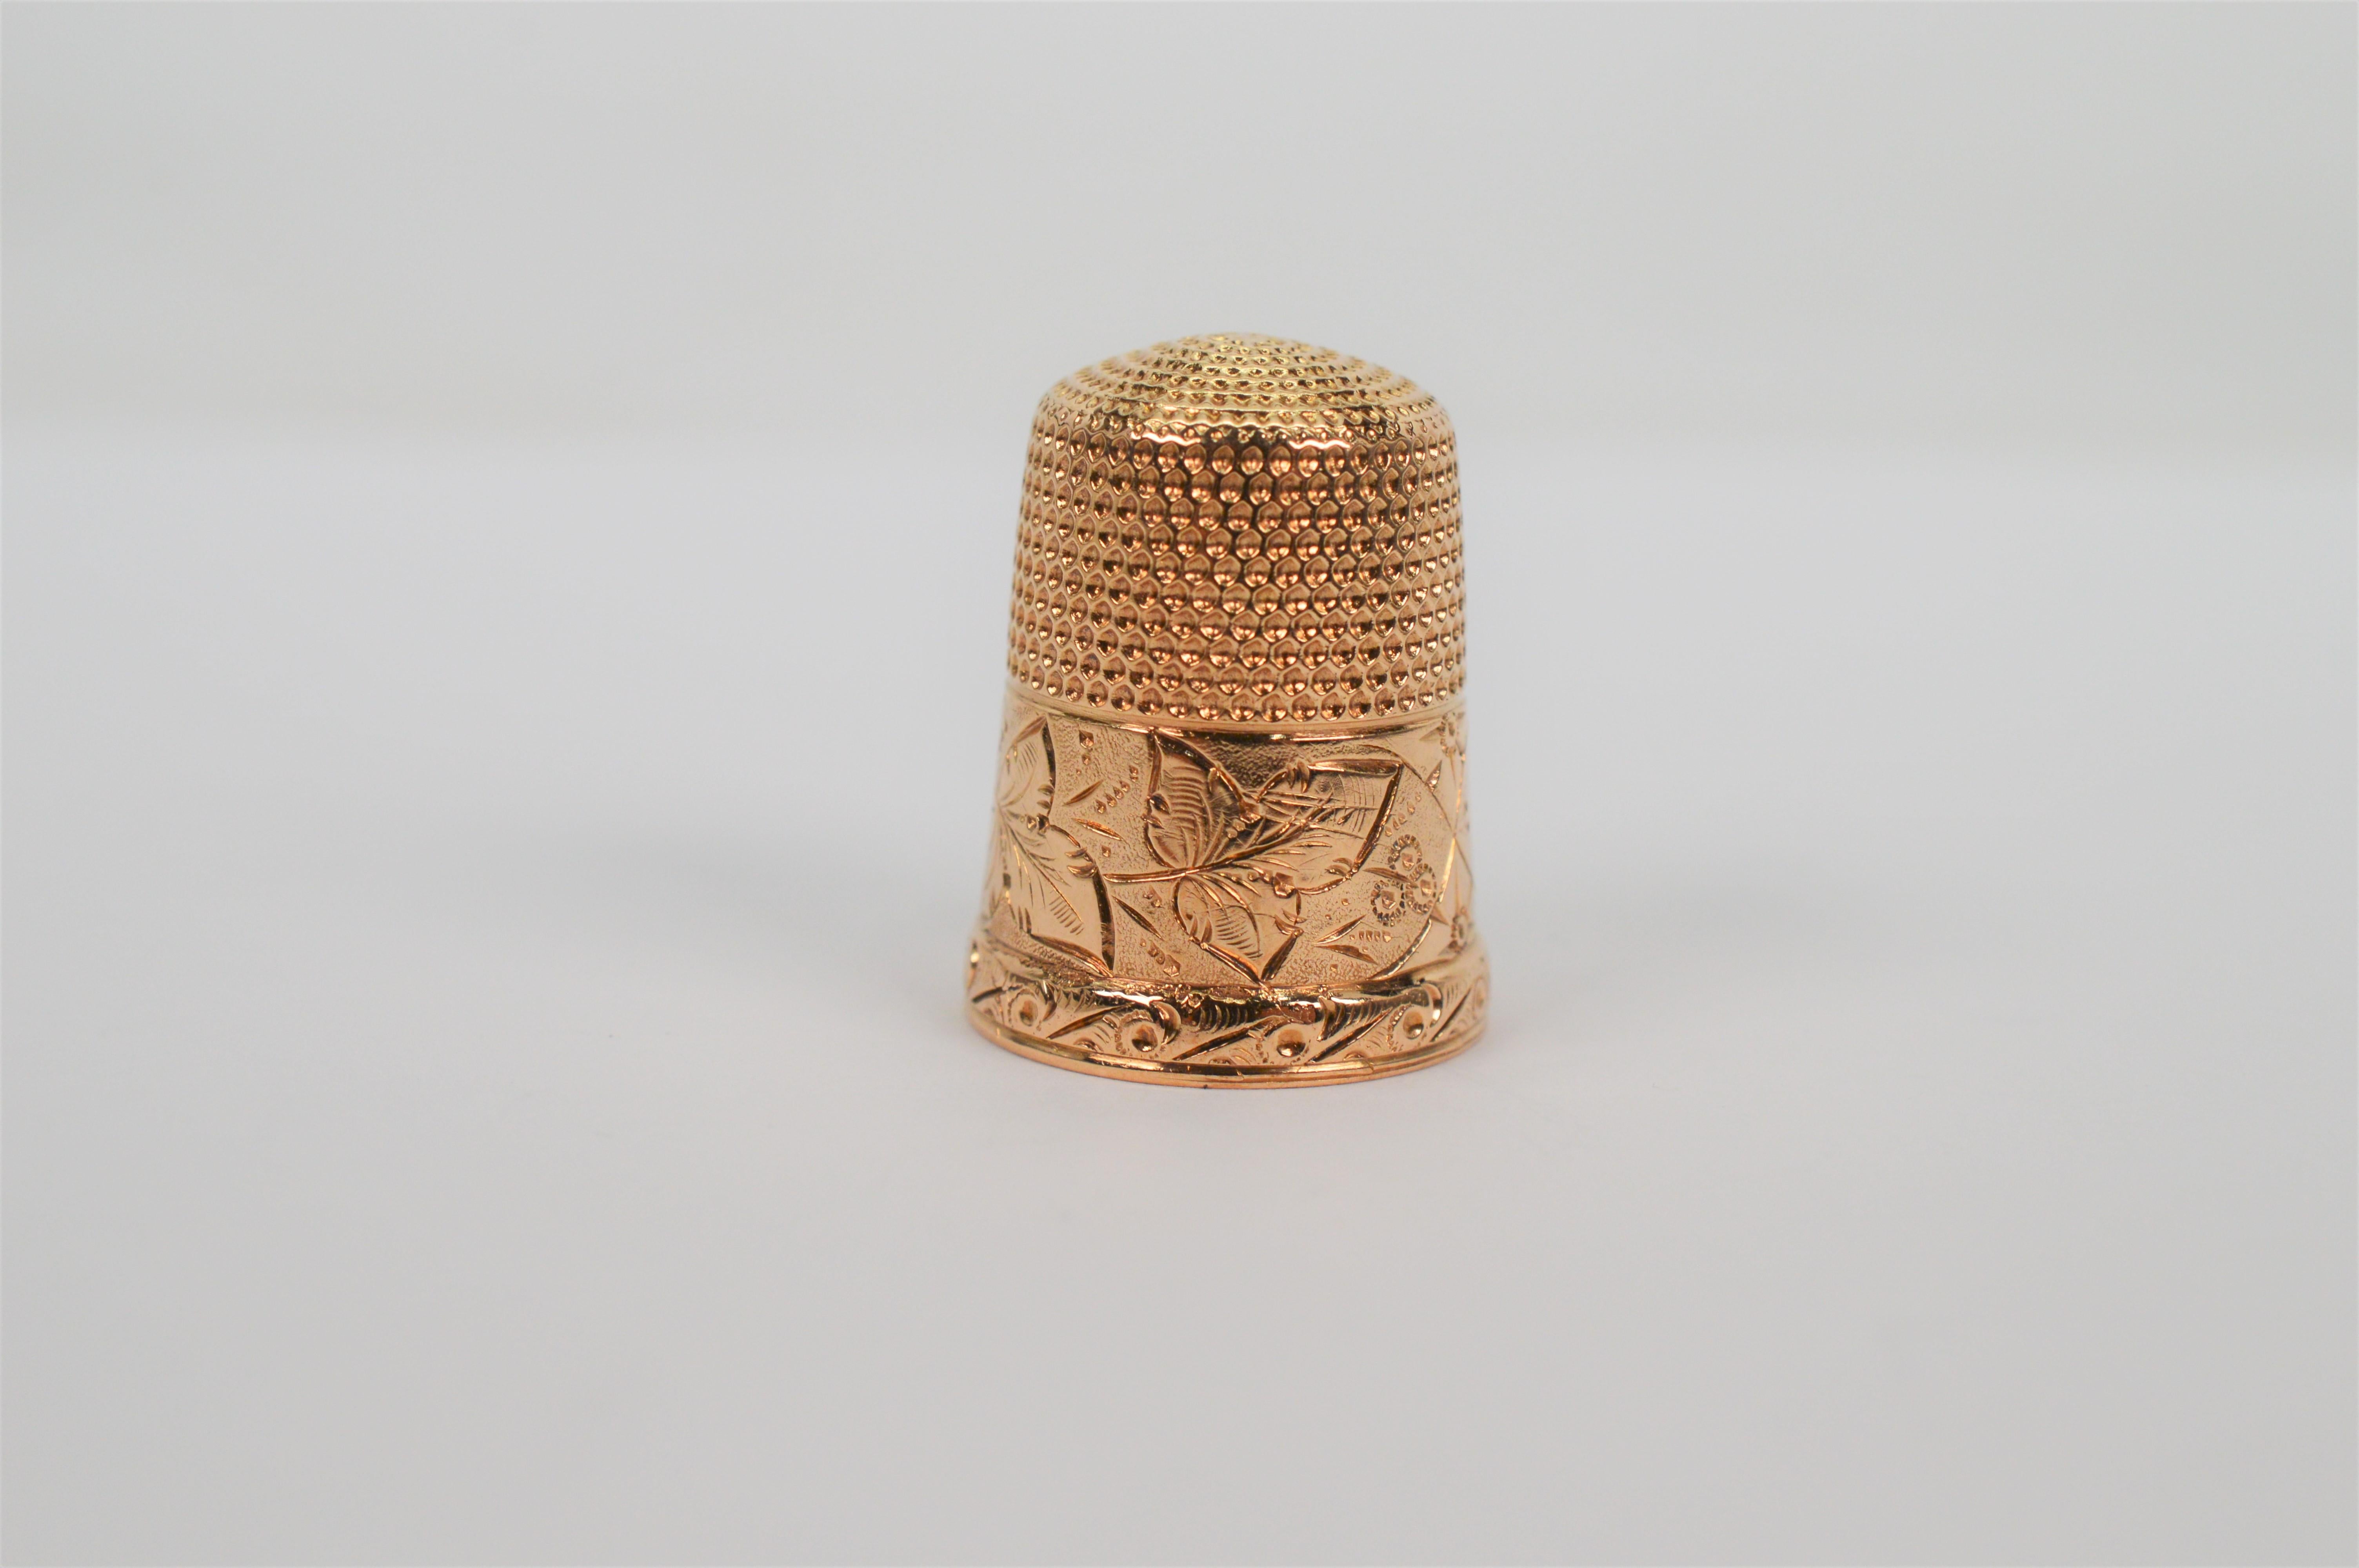 Add this adorable piece to your collection. Hand engraved fourteen karat 14 Karat yellow gold sewing thimble. 7/8 inch tall. 3.2 penny weight. Stamped 14k by maker. Gift boxed.